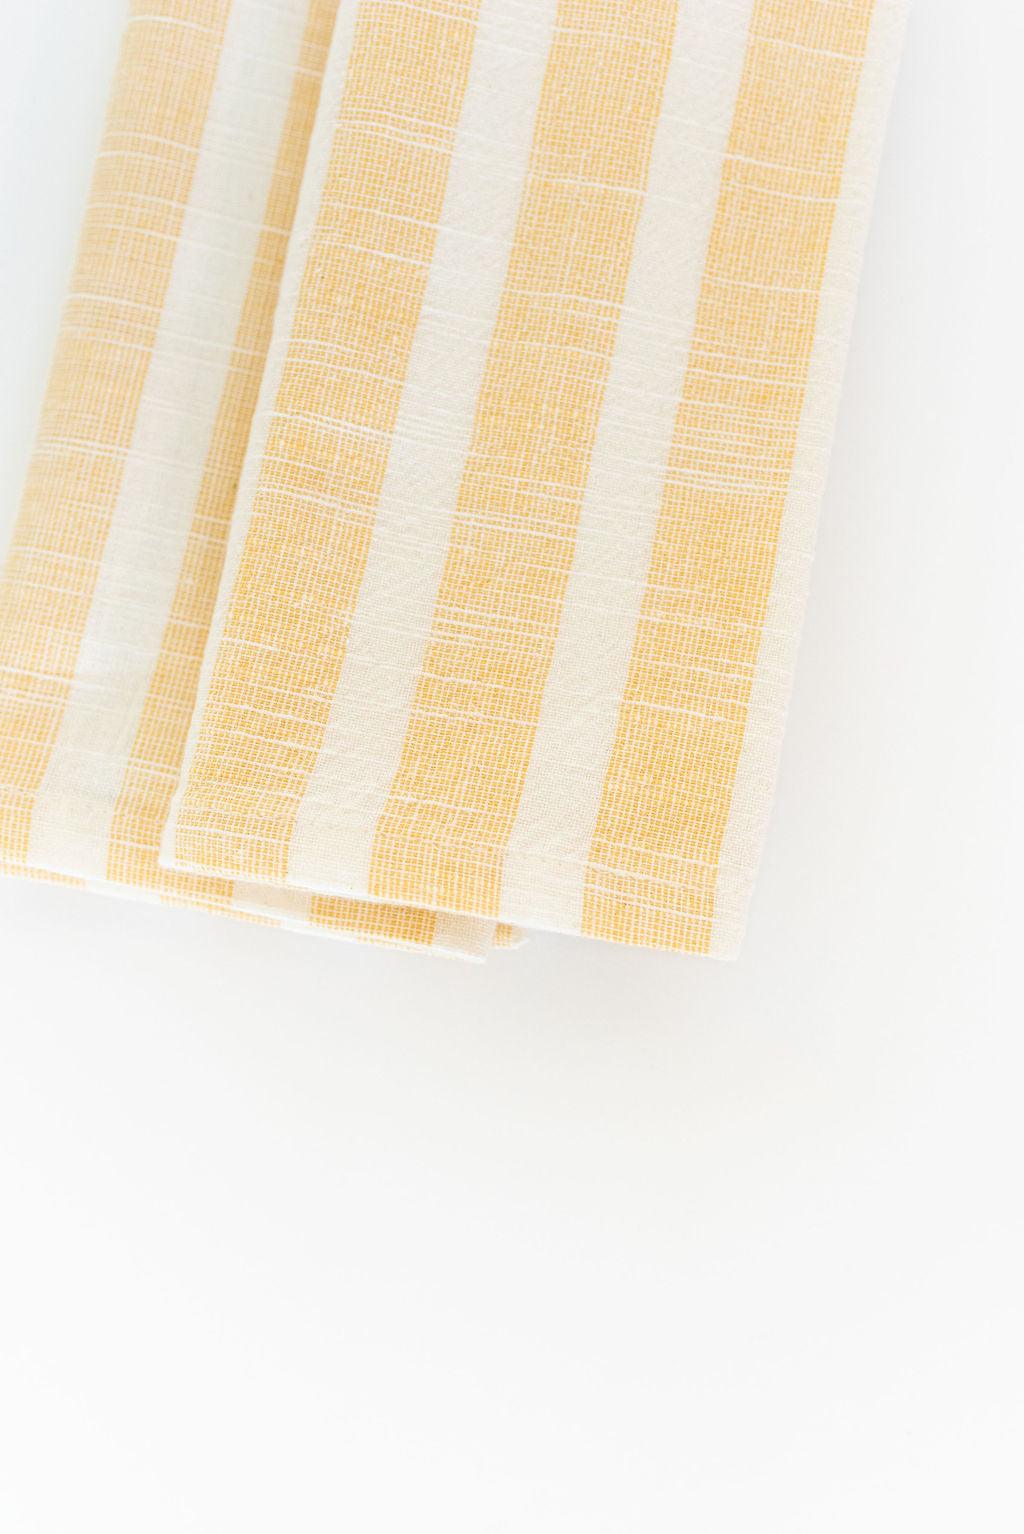 two folded yellow striped cotton napkins going off top of photo frame white background